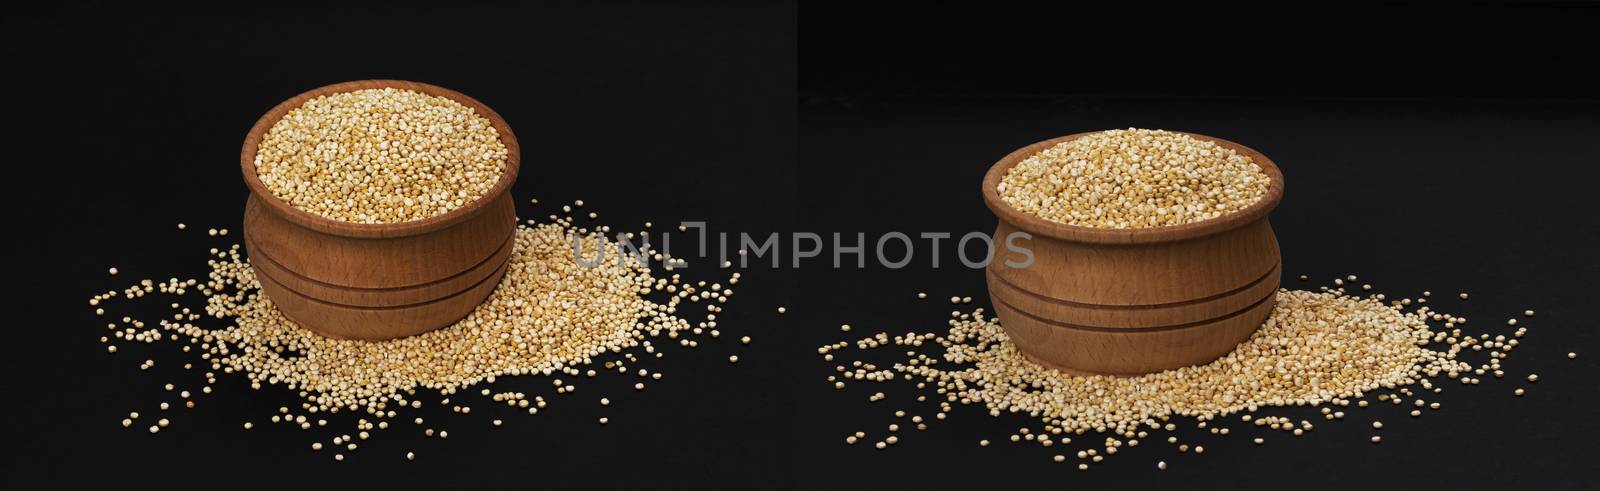 Quinoa seeds. Bowl of healthy white quinoa grains isolated on black background, close-up by xamtiw